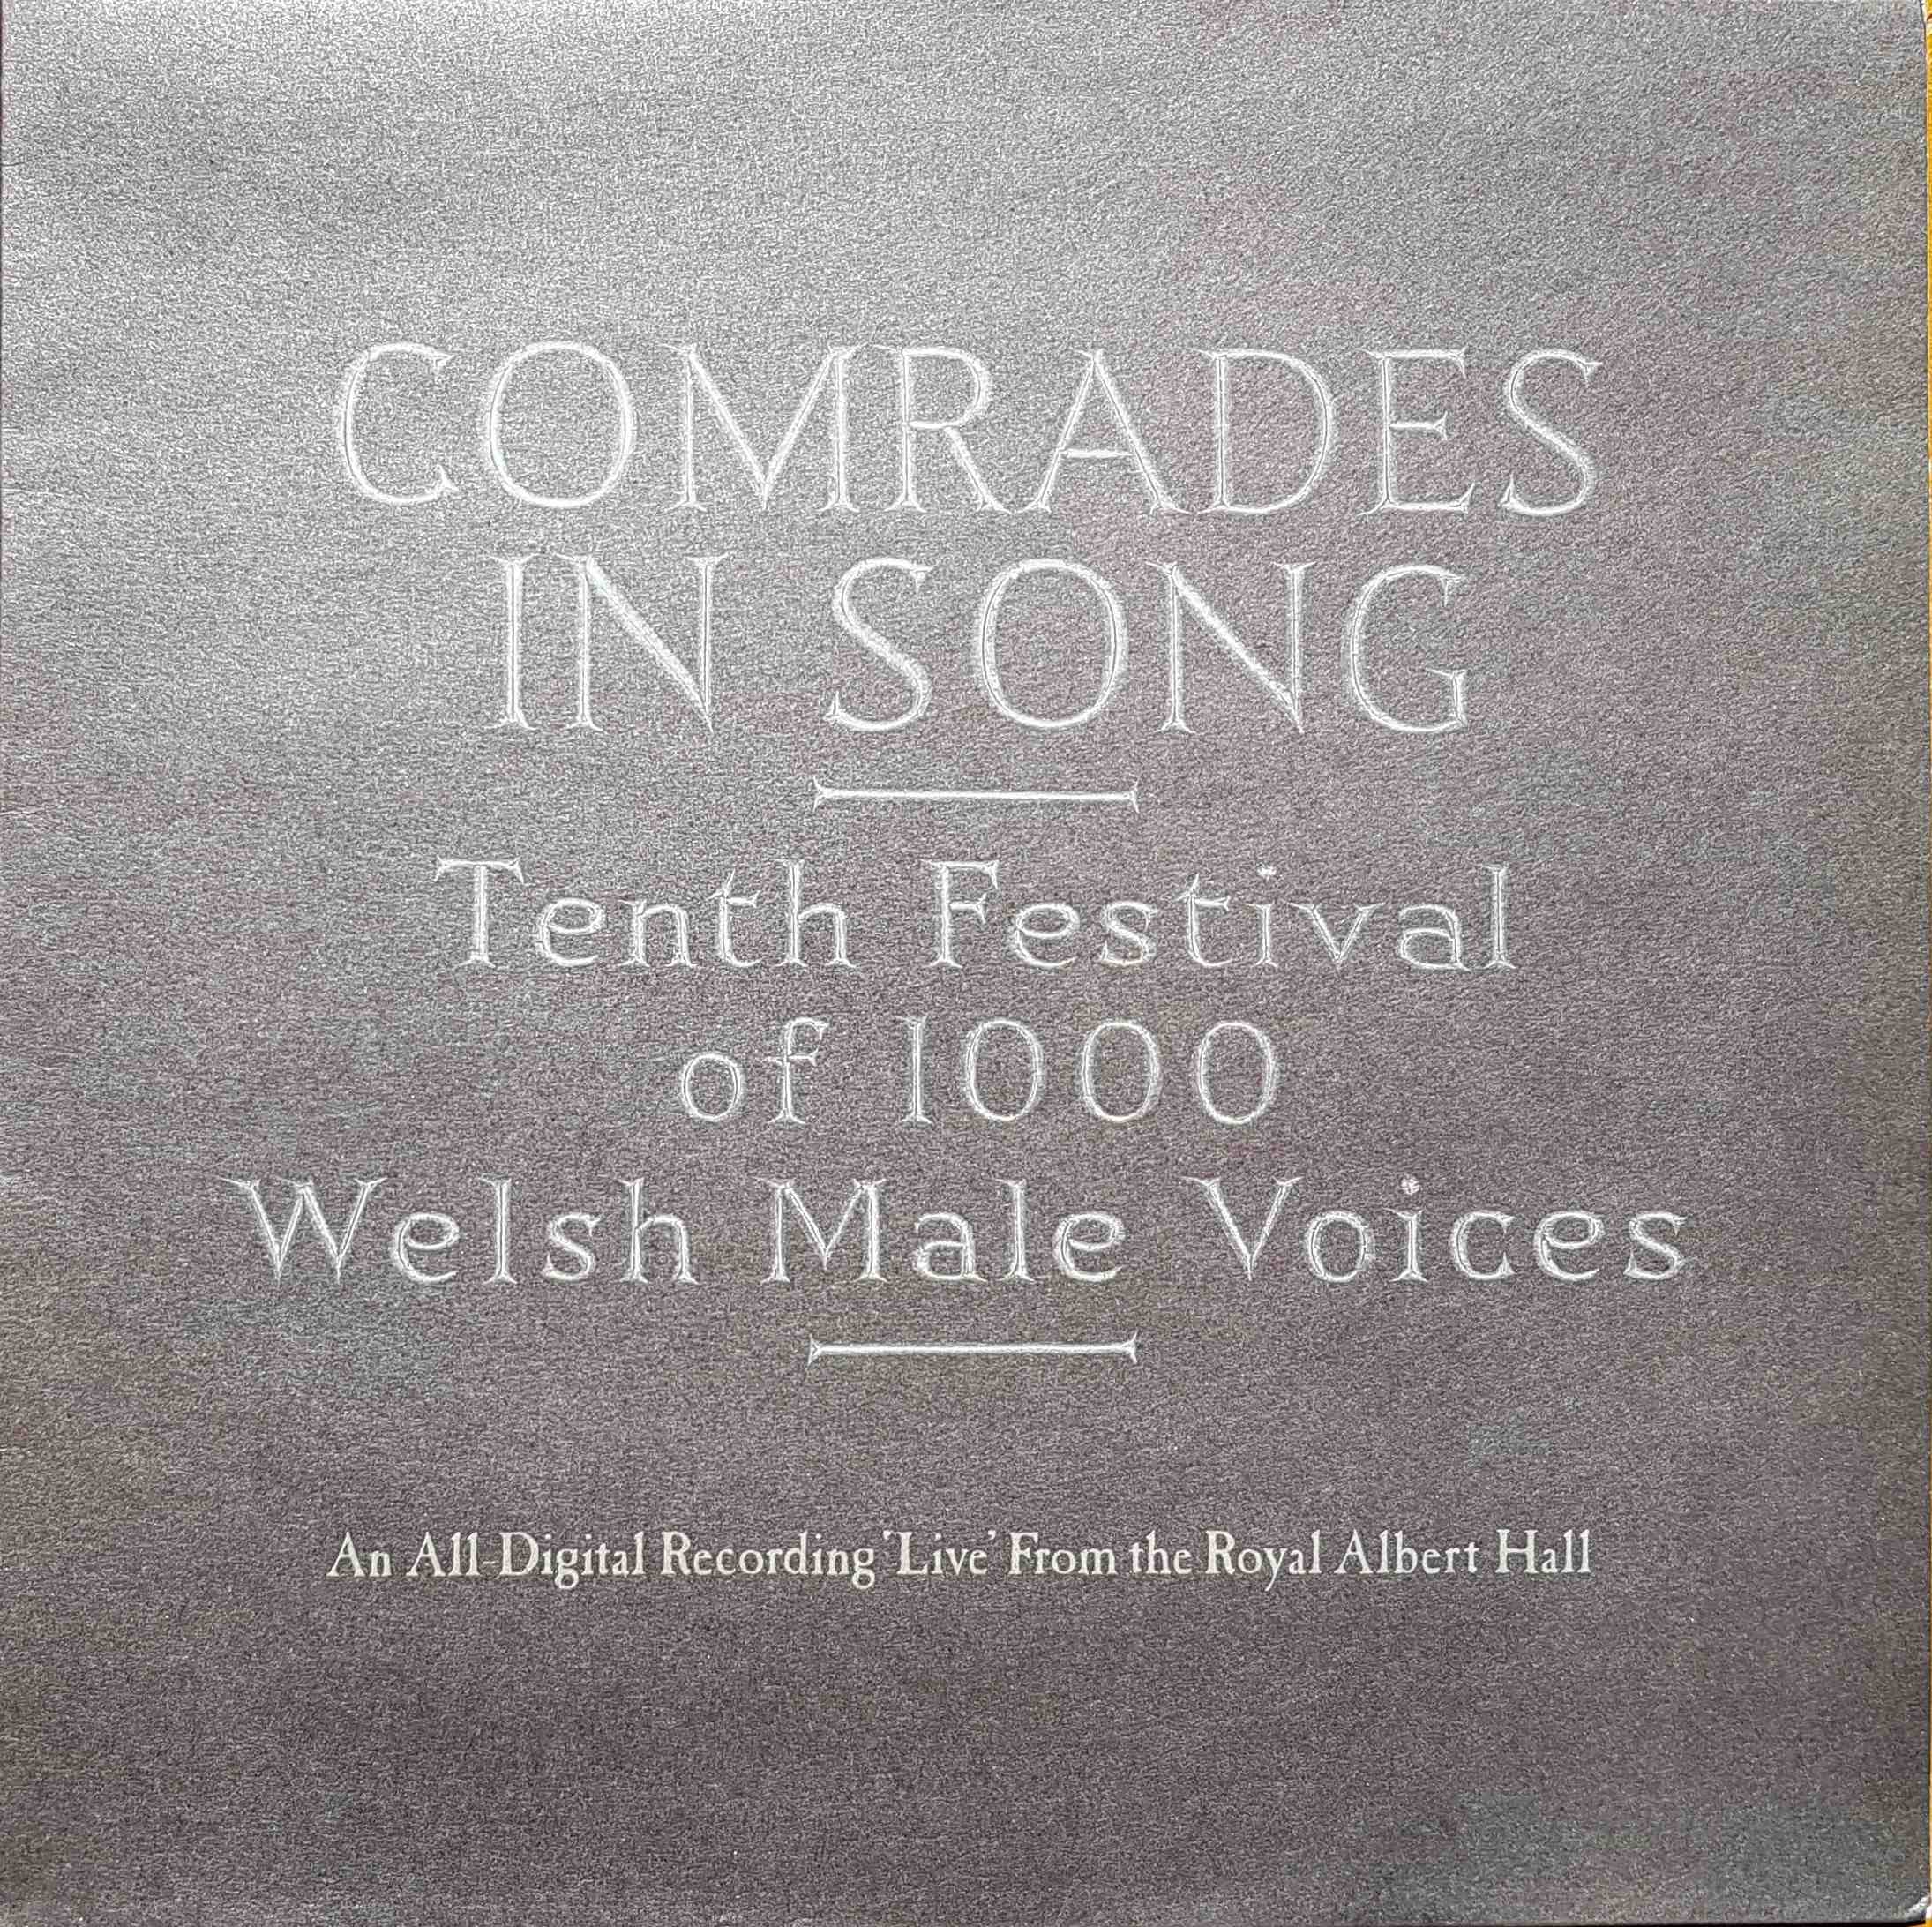 Picture of REH 630 Comrades in song by artist Various from the BBC albums - Records and Tapes library